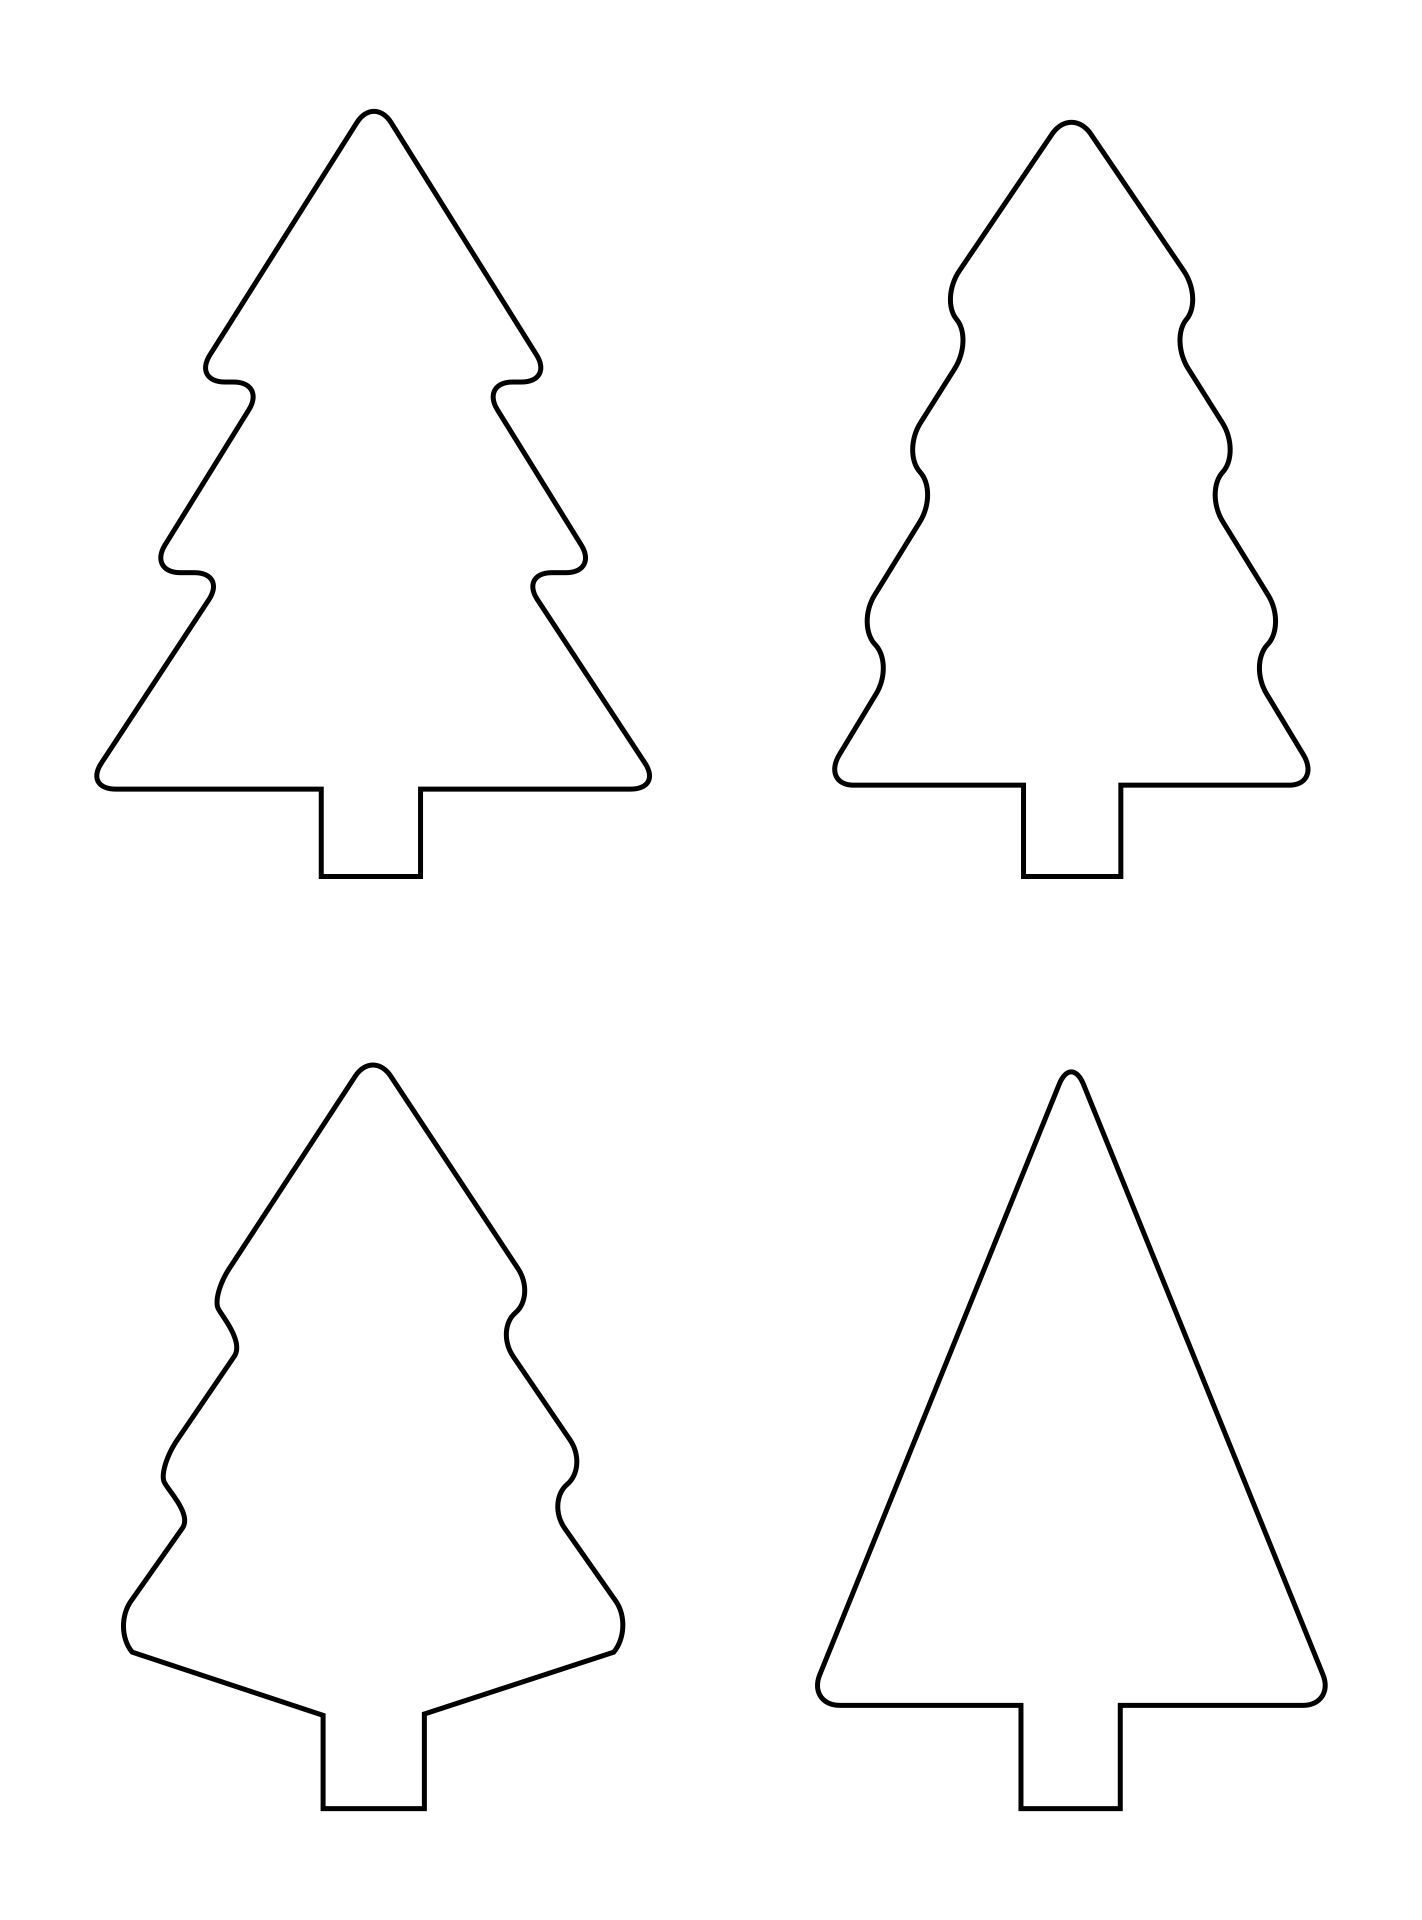 christmas-tree-templates-free-printable-outlines-patterns-in-all